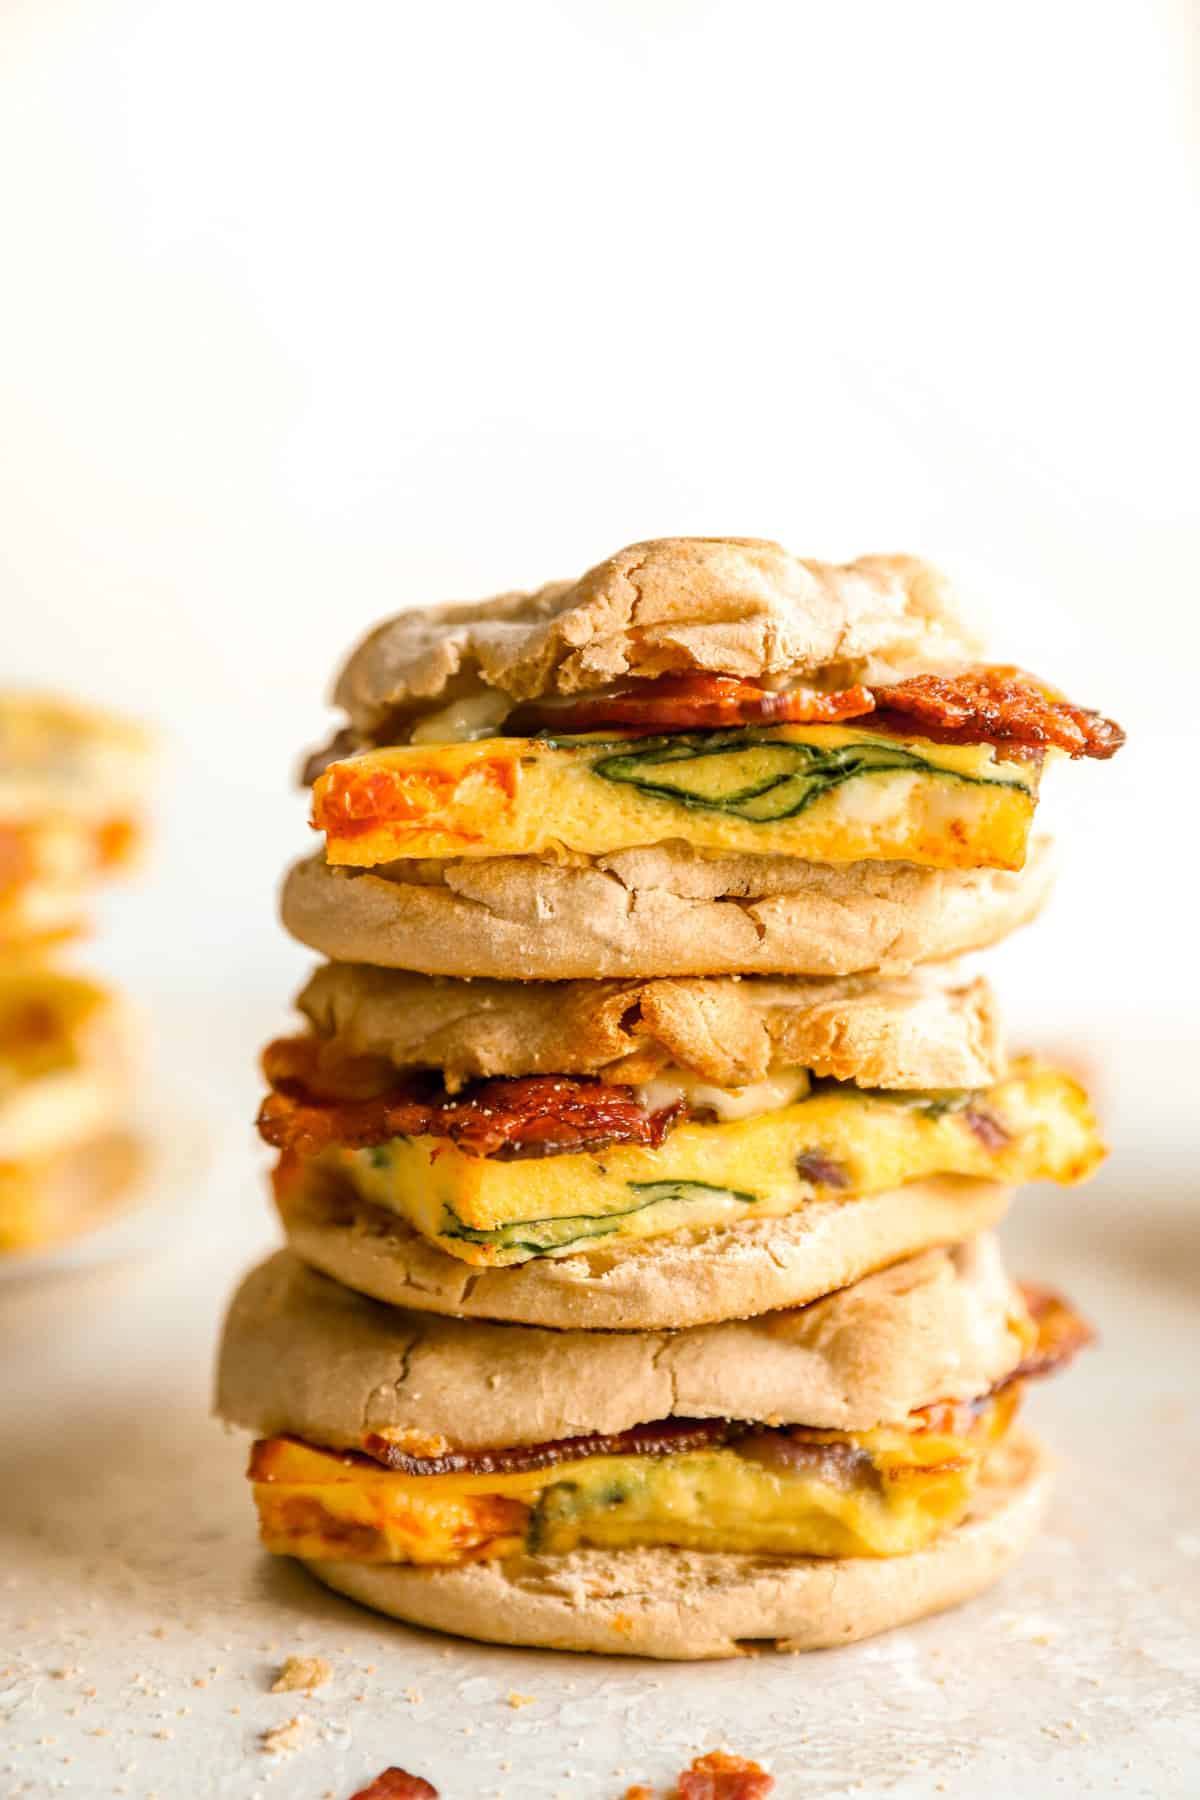 These sheet pan eggs are perfect cubed and layered into my favorite frozen breakfast sandwiches